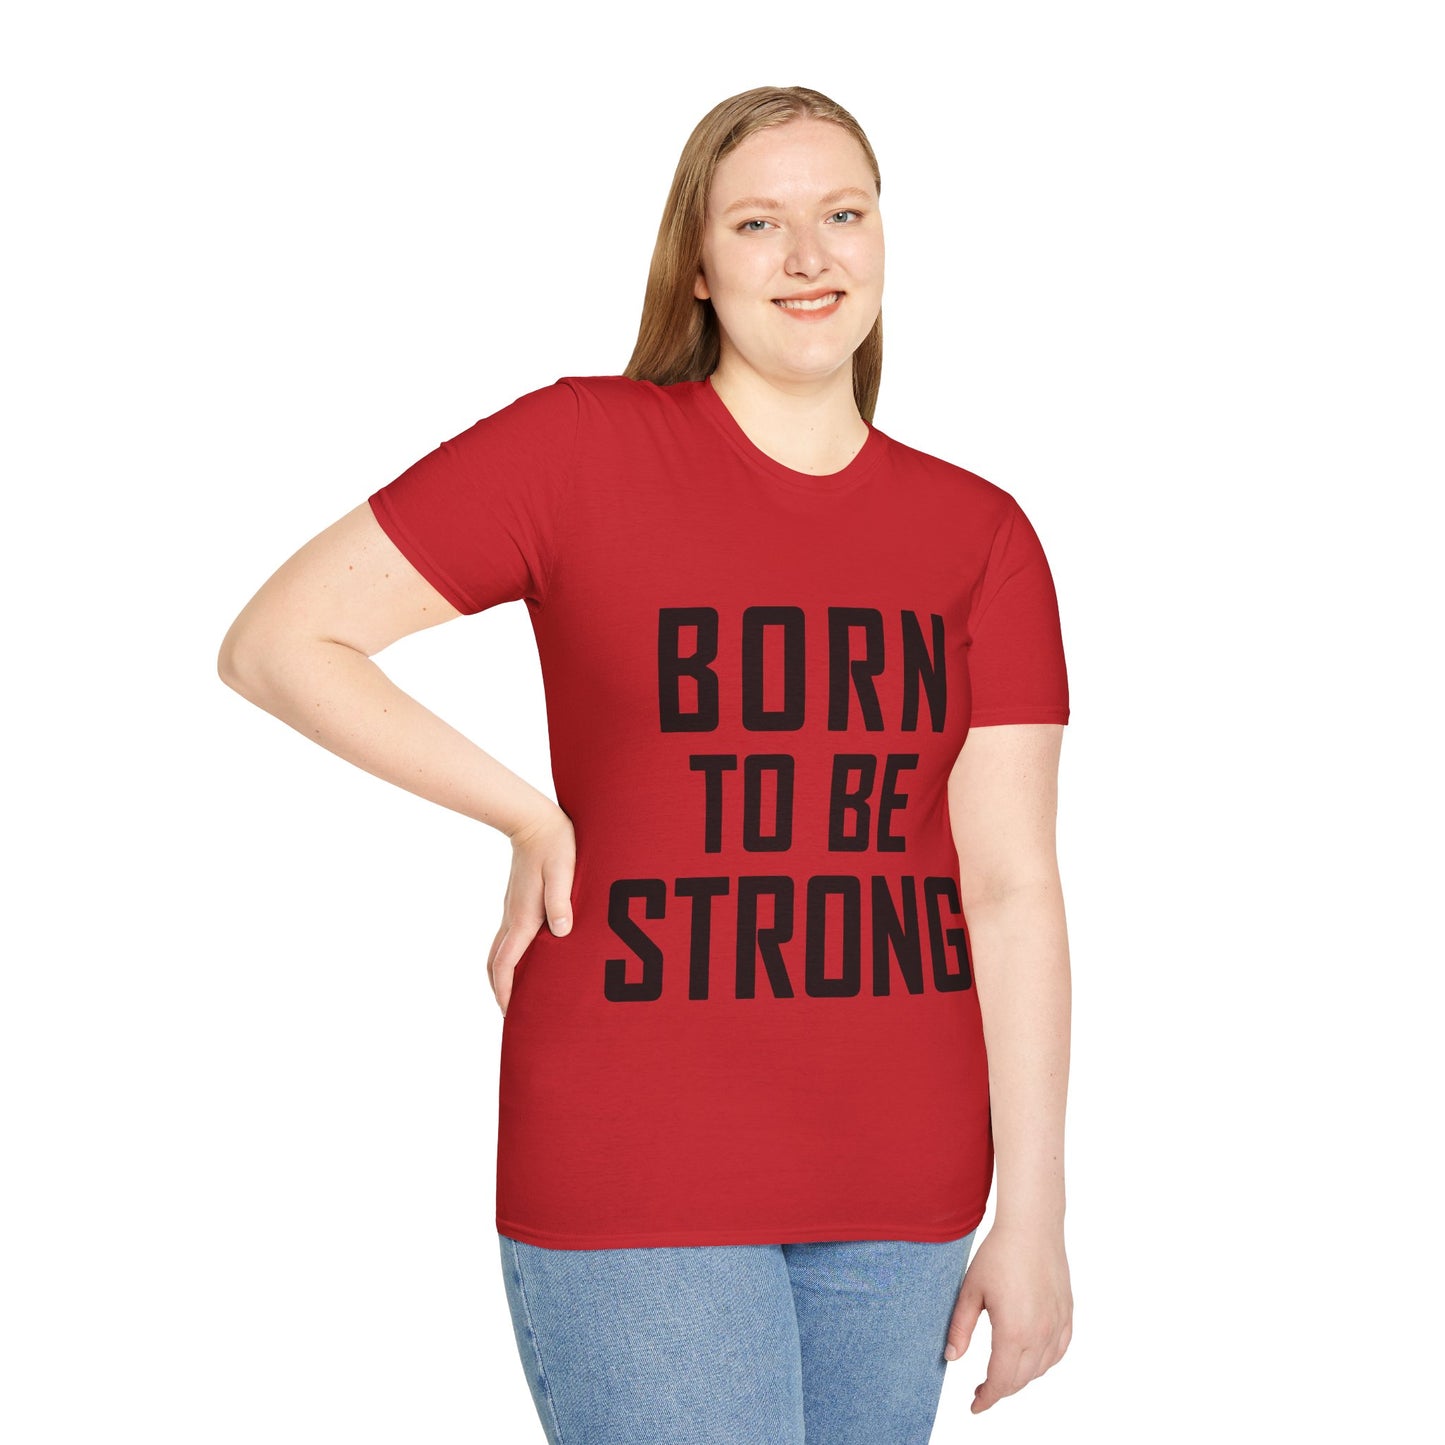 BORN TO BE STRONG Unisex Softstyle T-Shirt